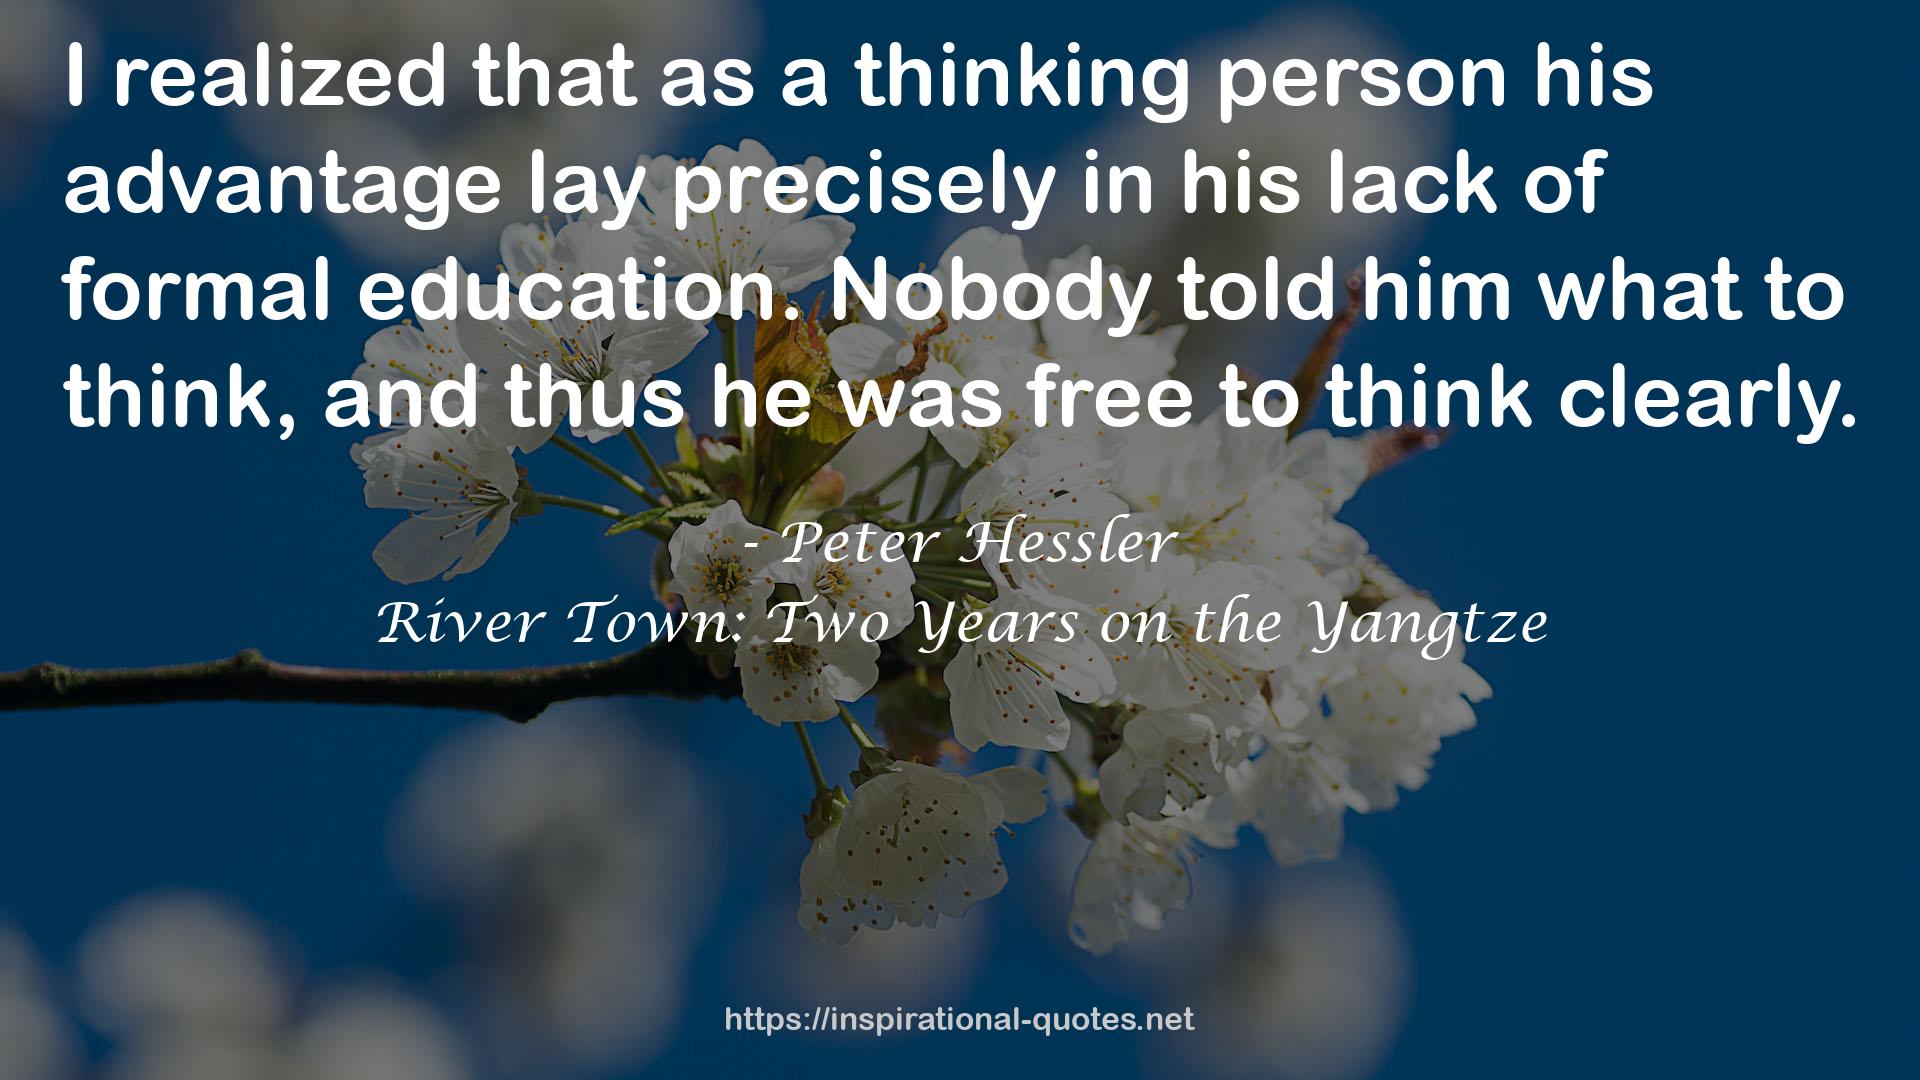 River Town: Two Years on the Yangtze QUOTES